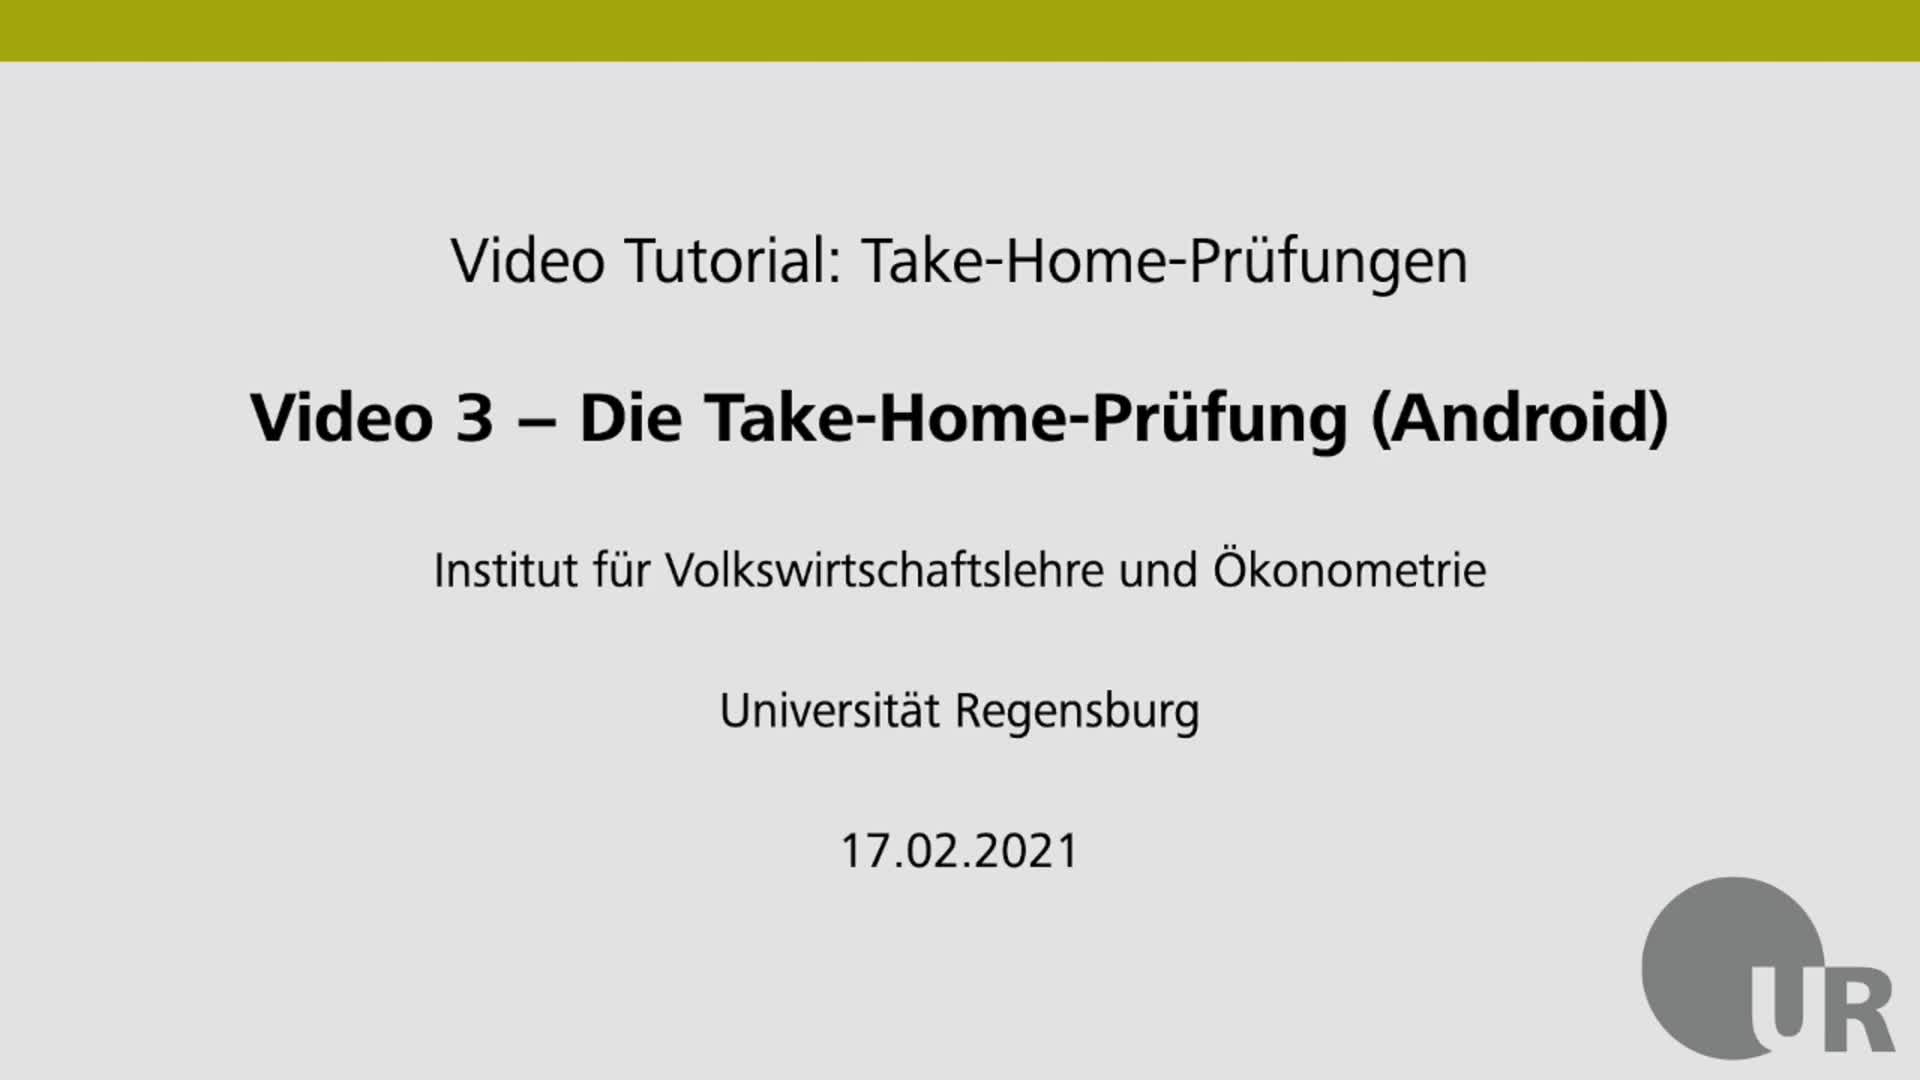 Video 3 - Die Take-Home-Prüfung (Android)